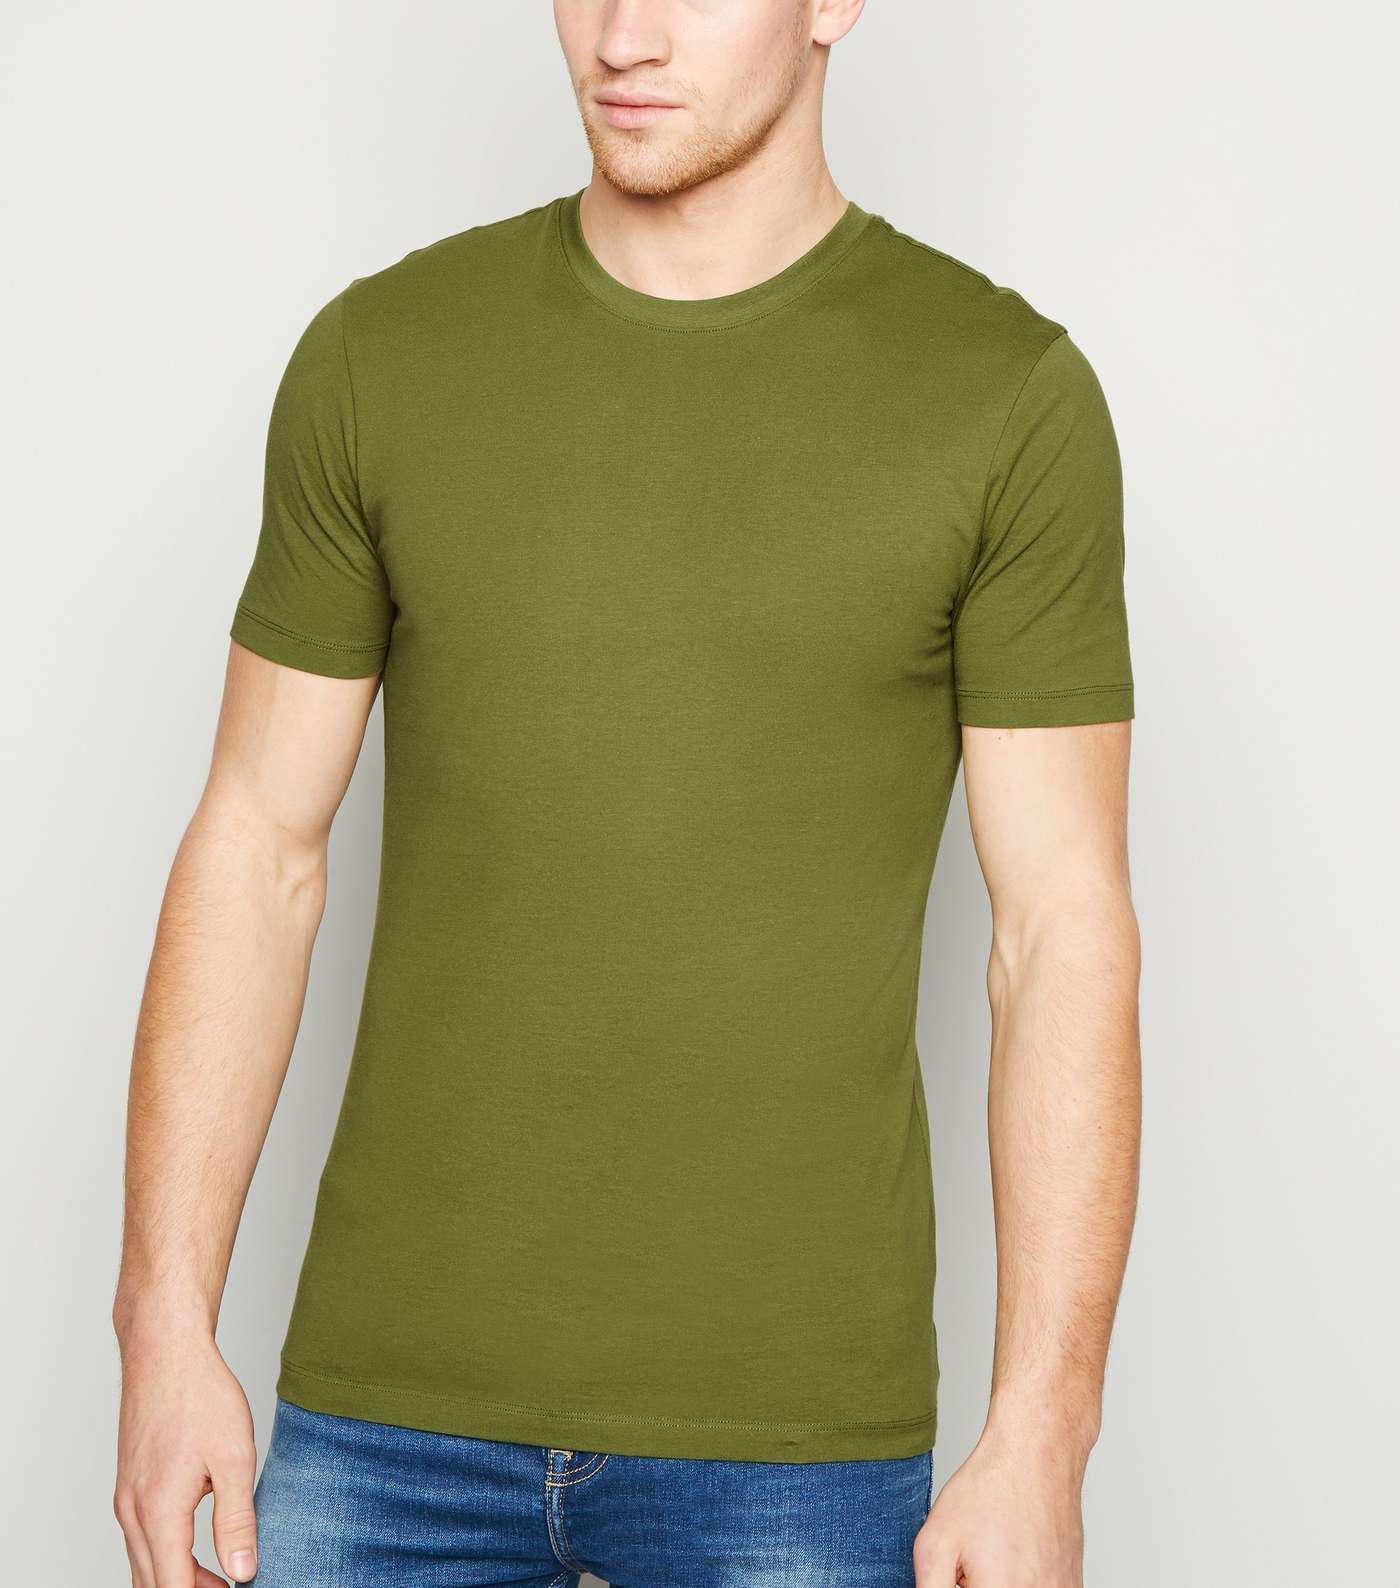 Green Muscle Fit Cotton T-Shirt